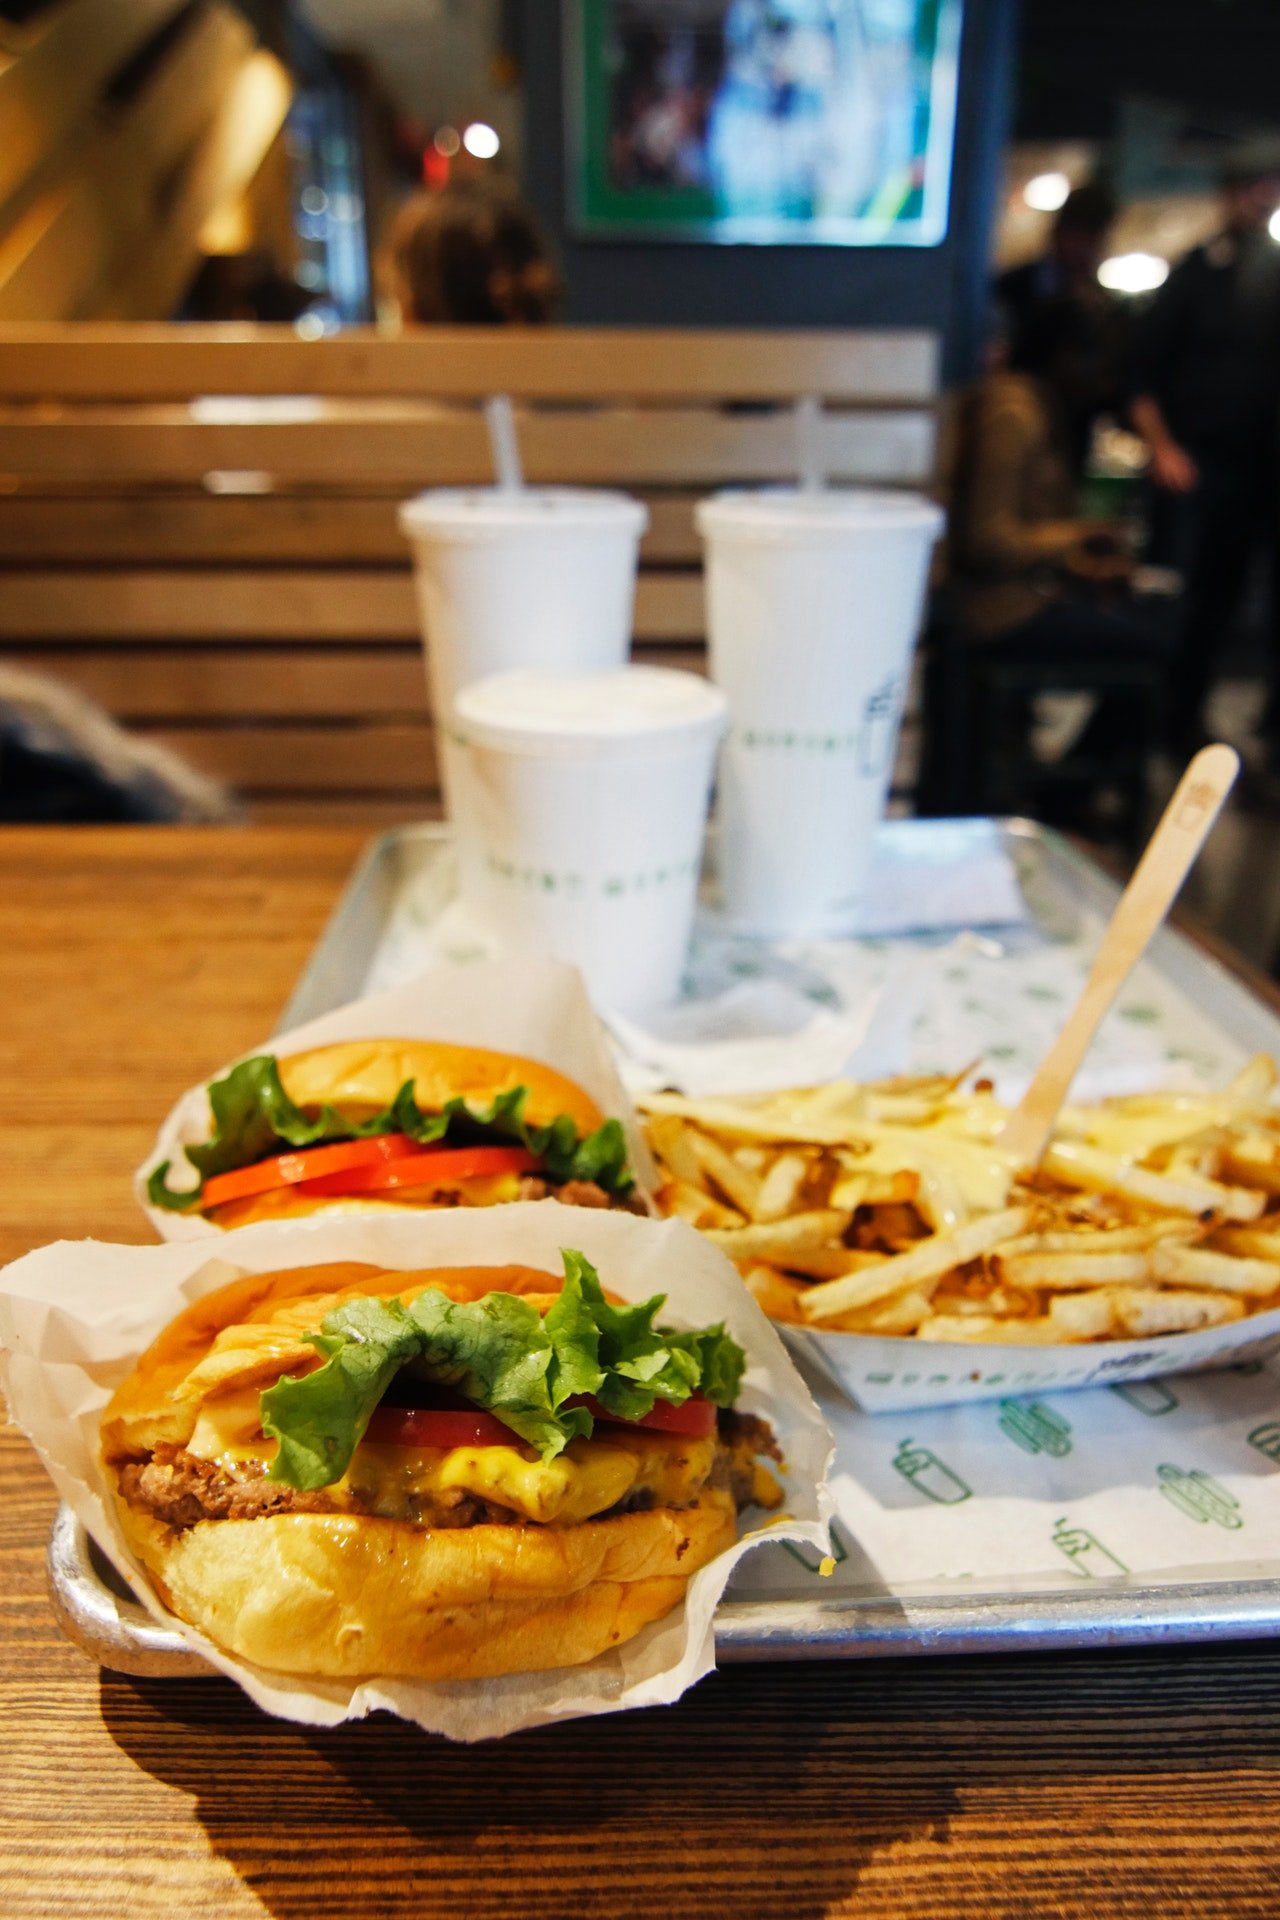 They decided to go eat burgers together. | Source: Pexels